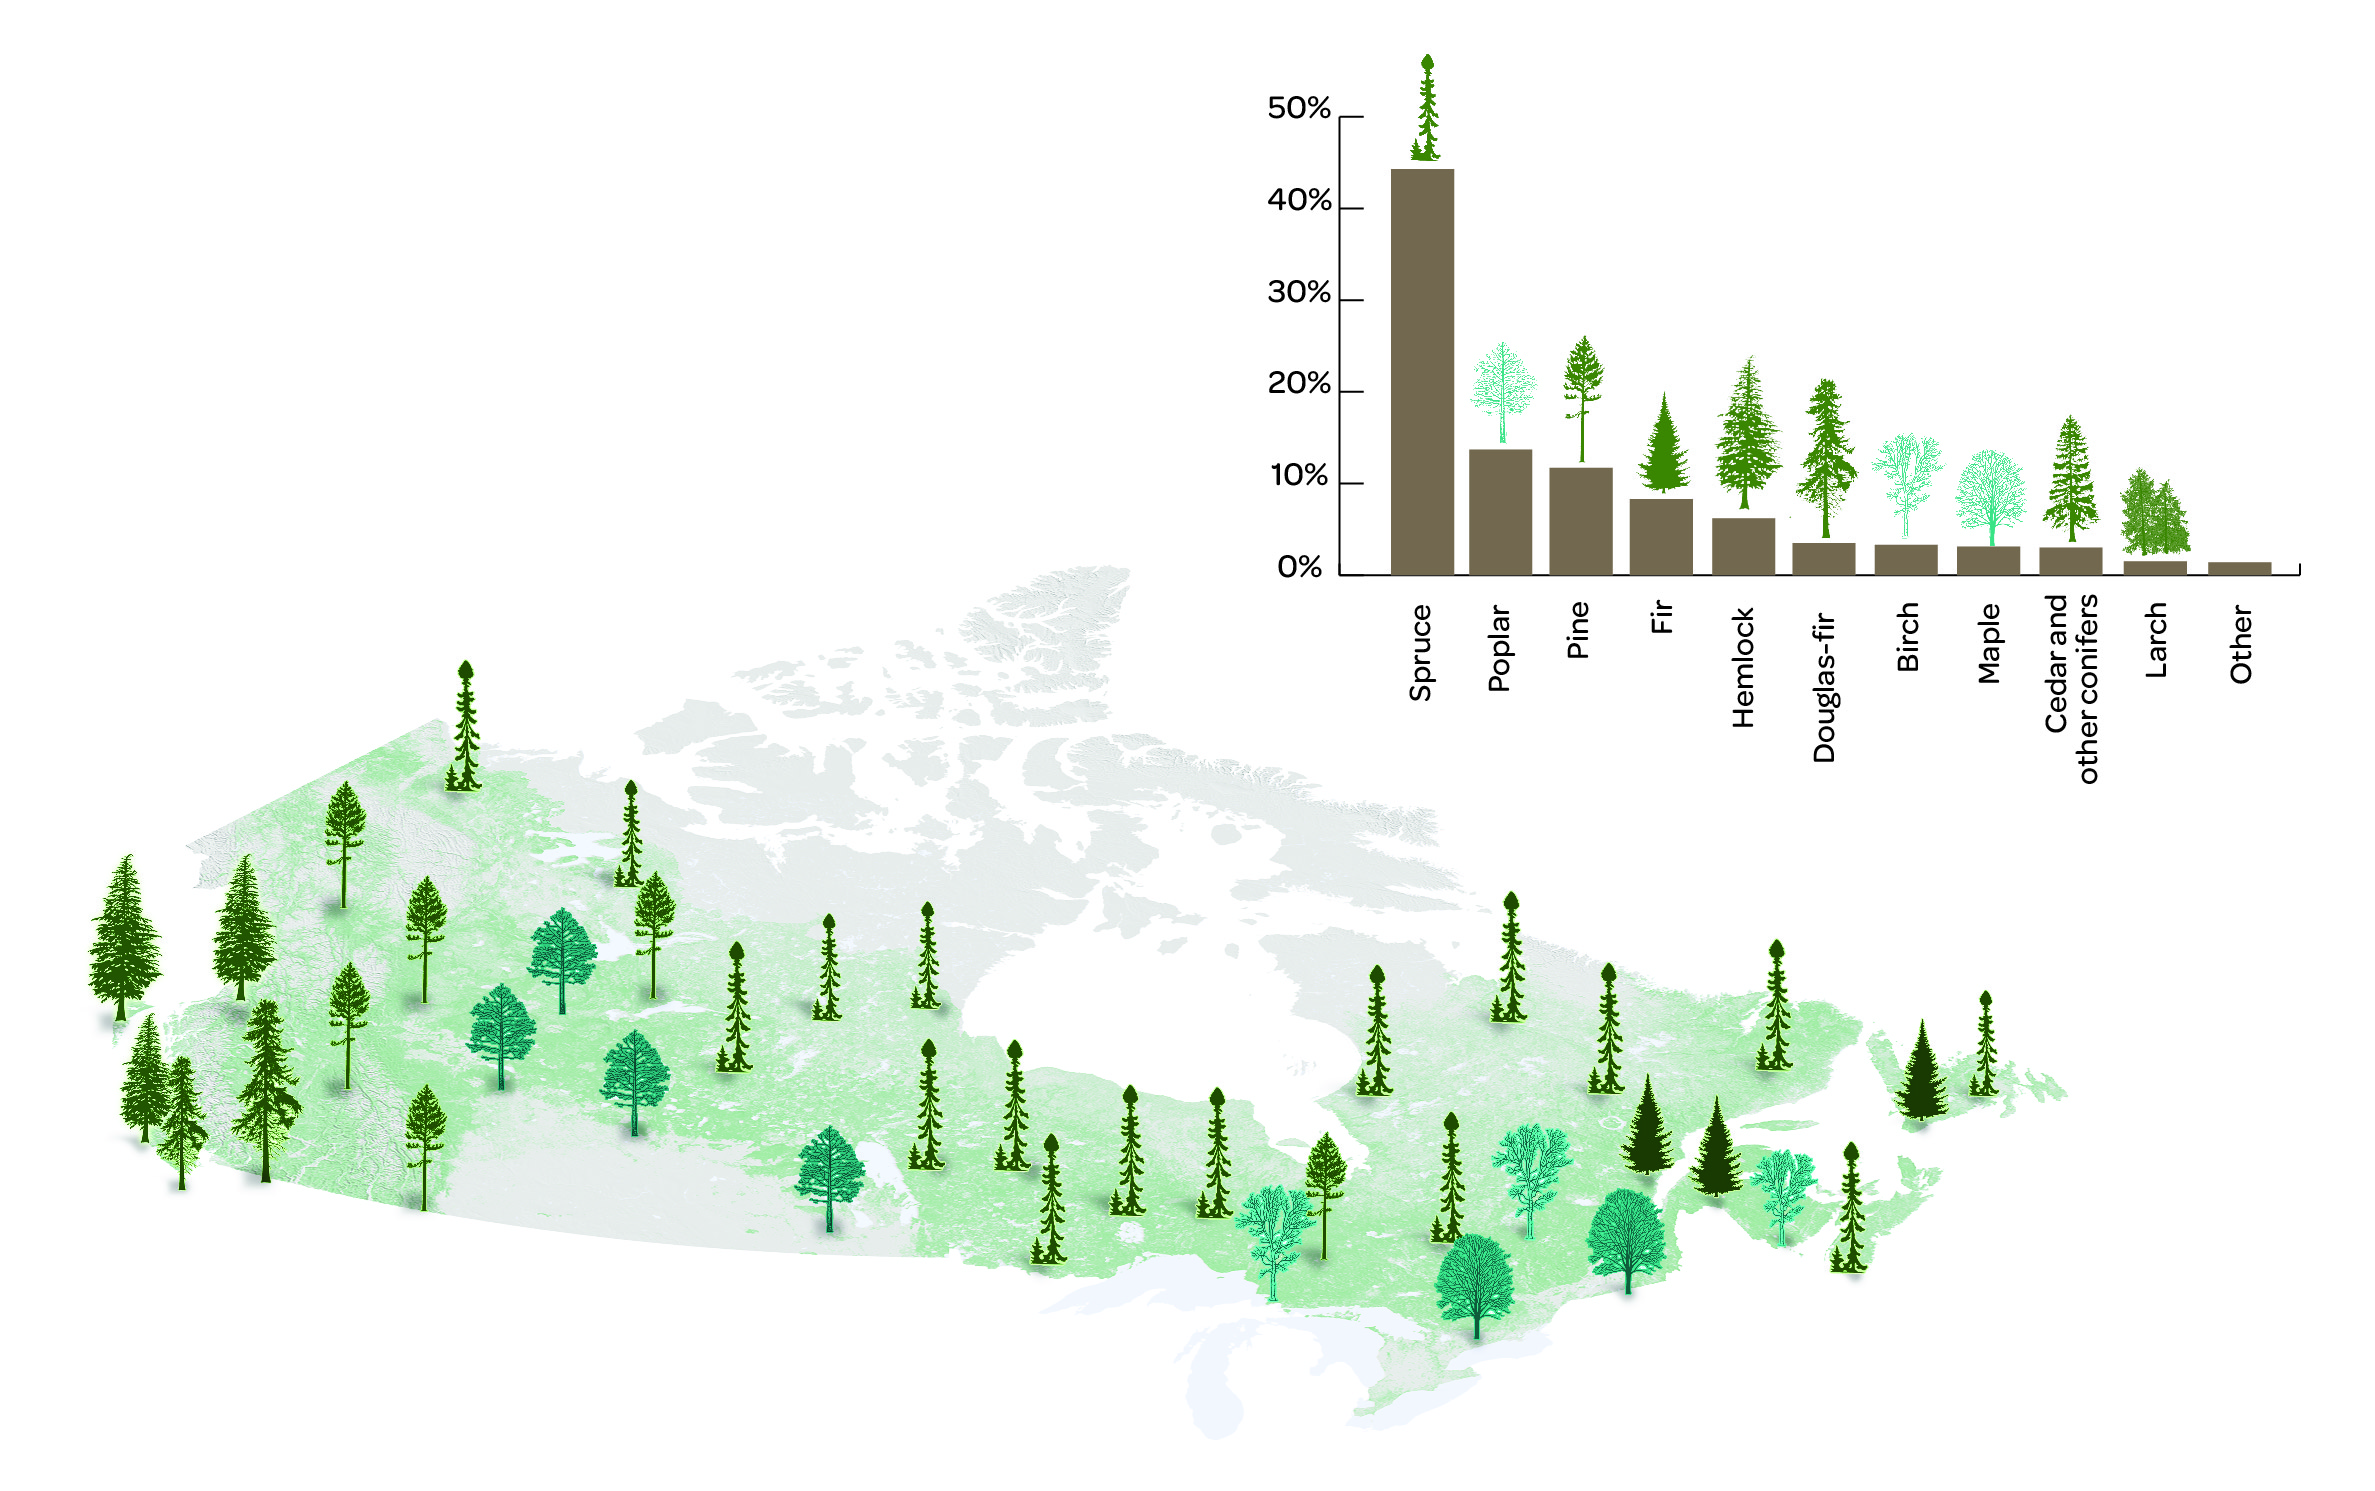 Canada’s forests by species